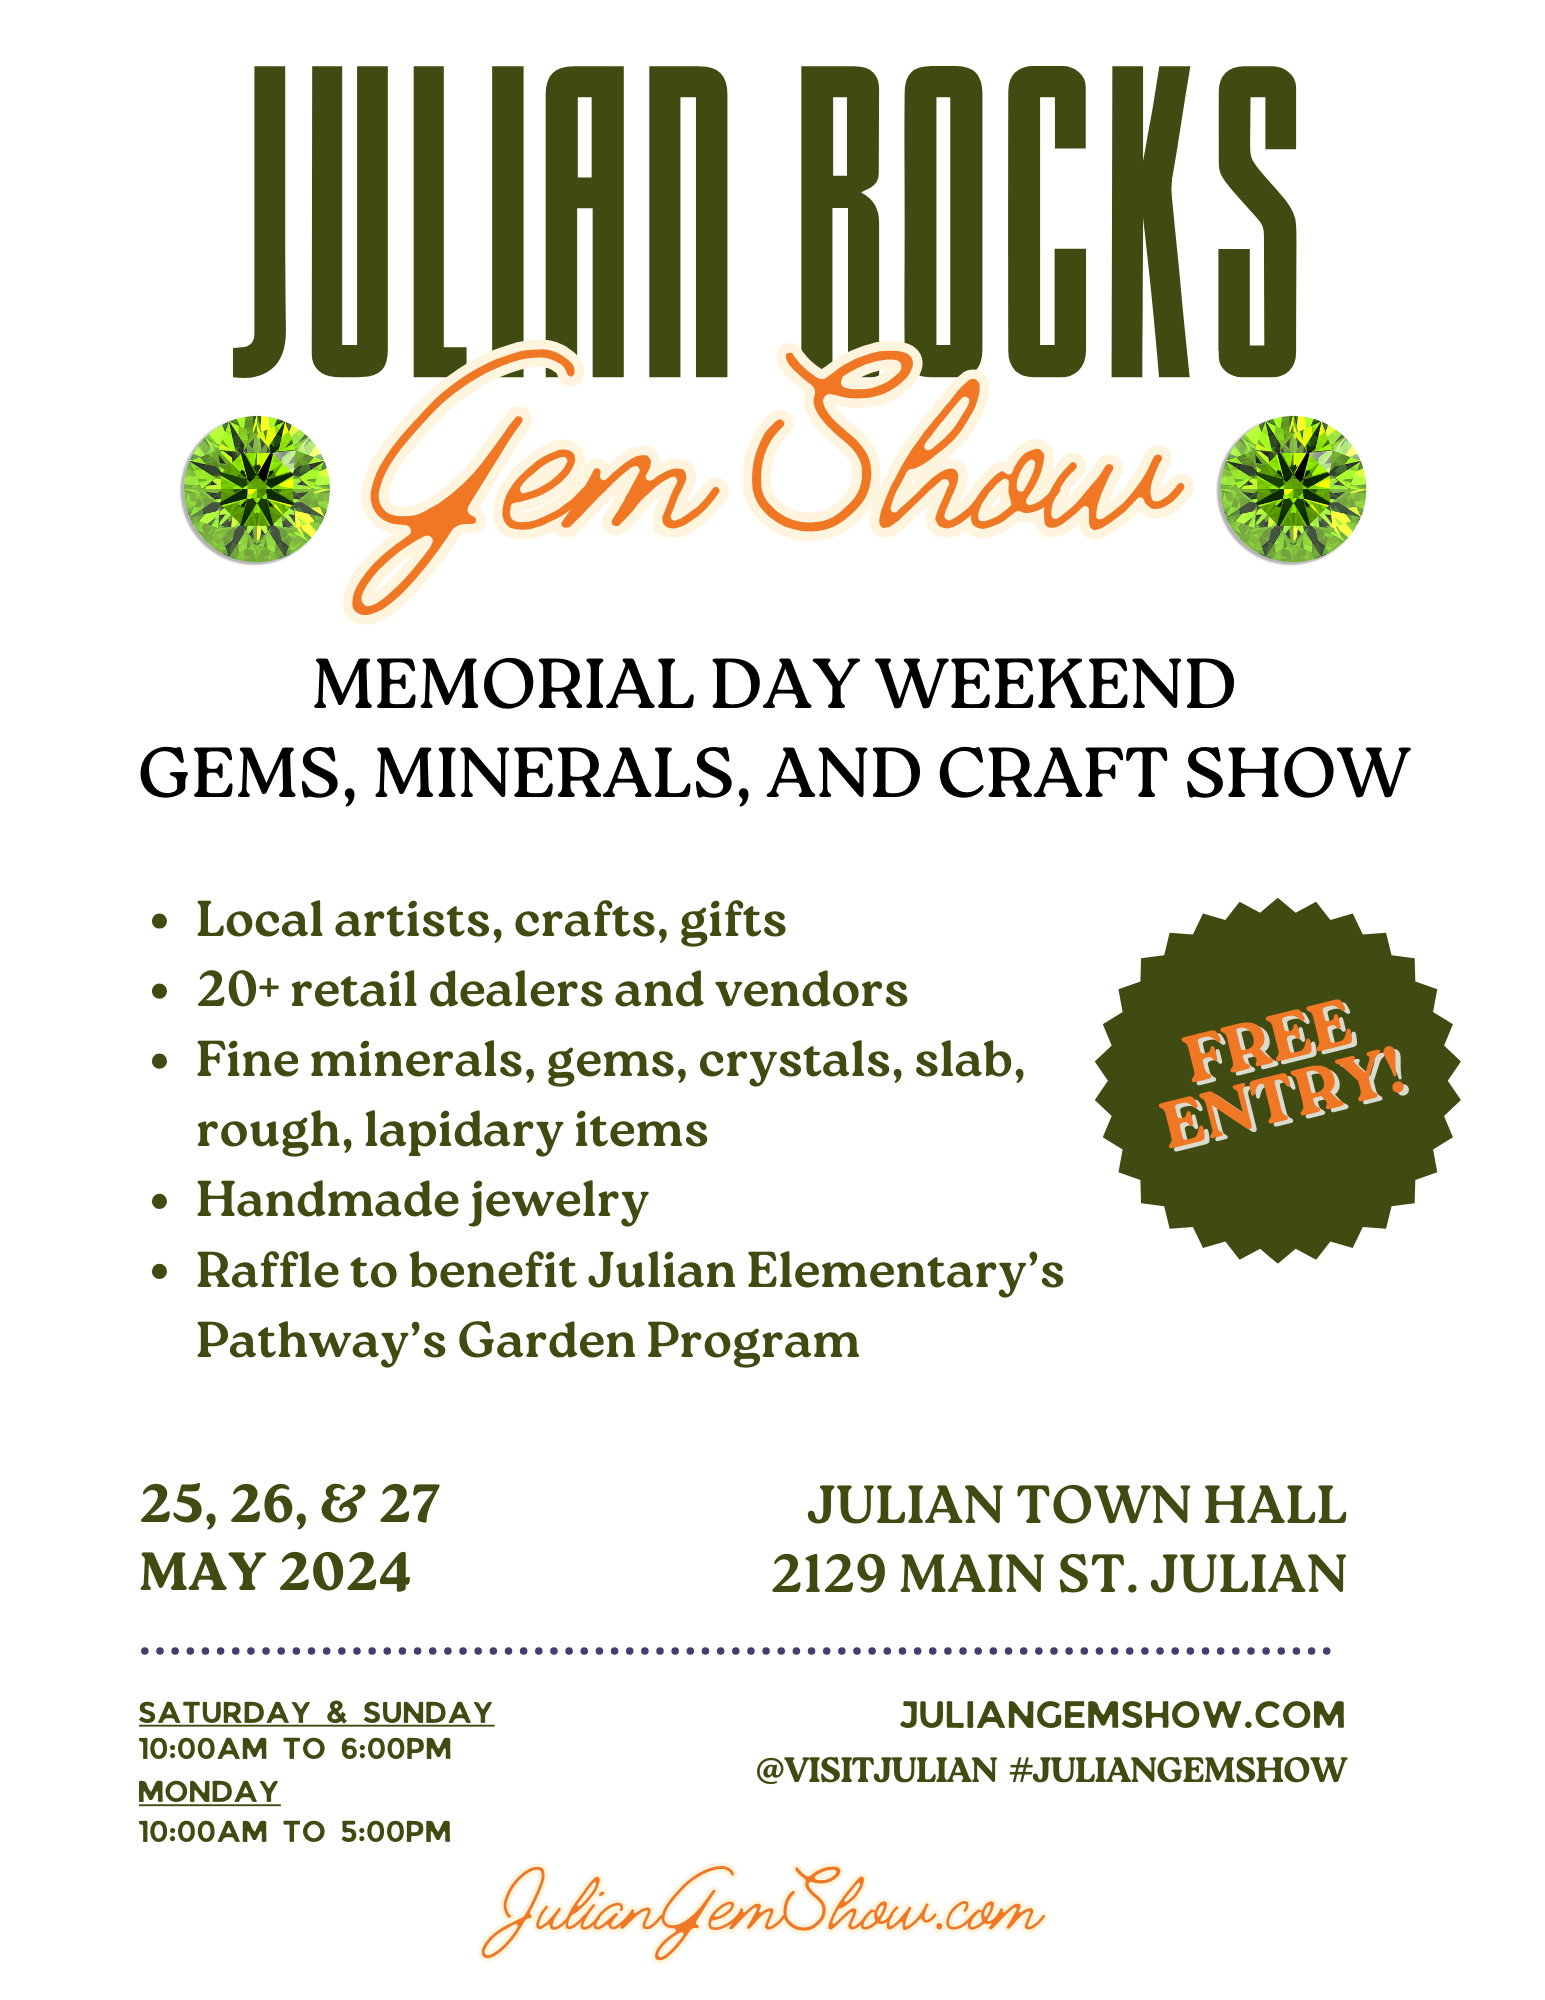 Memorial day weekend gems, minerals, and craft show 